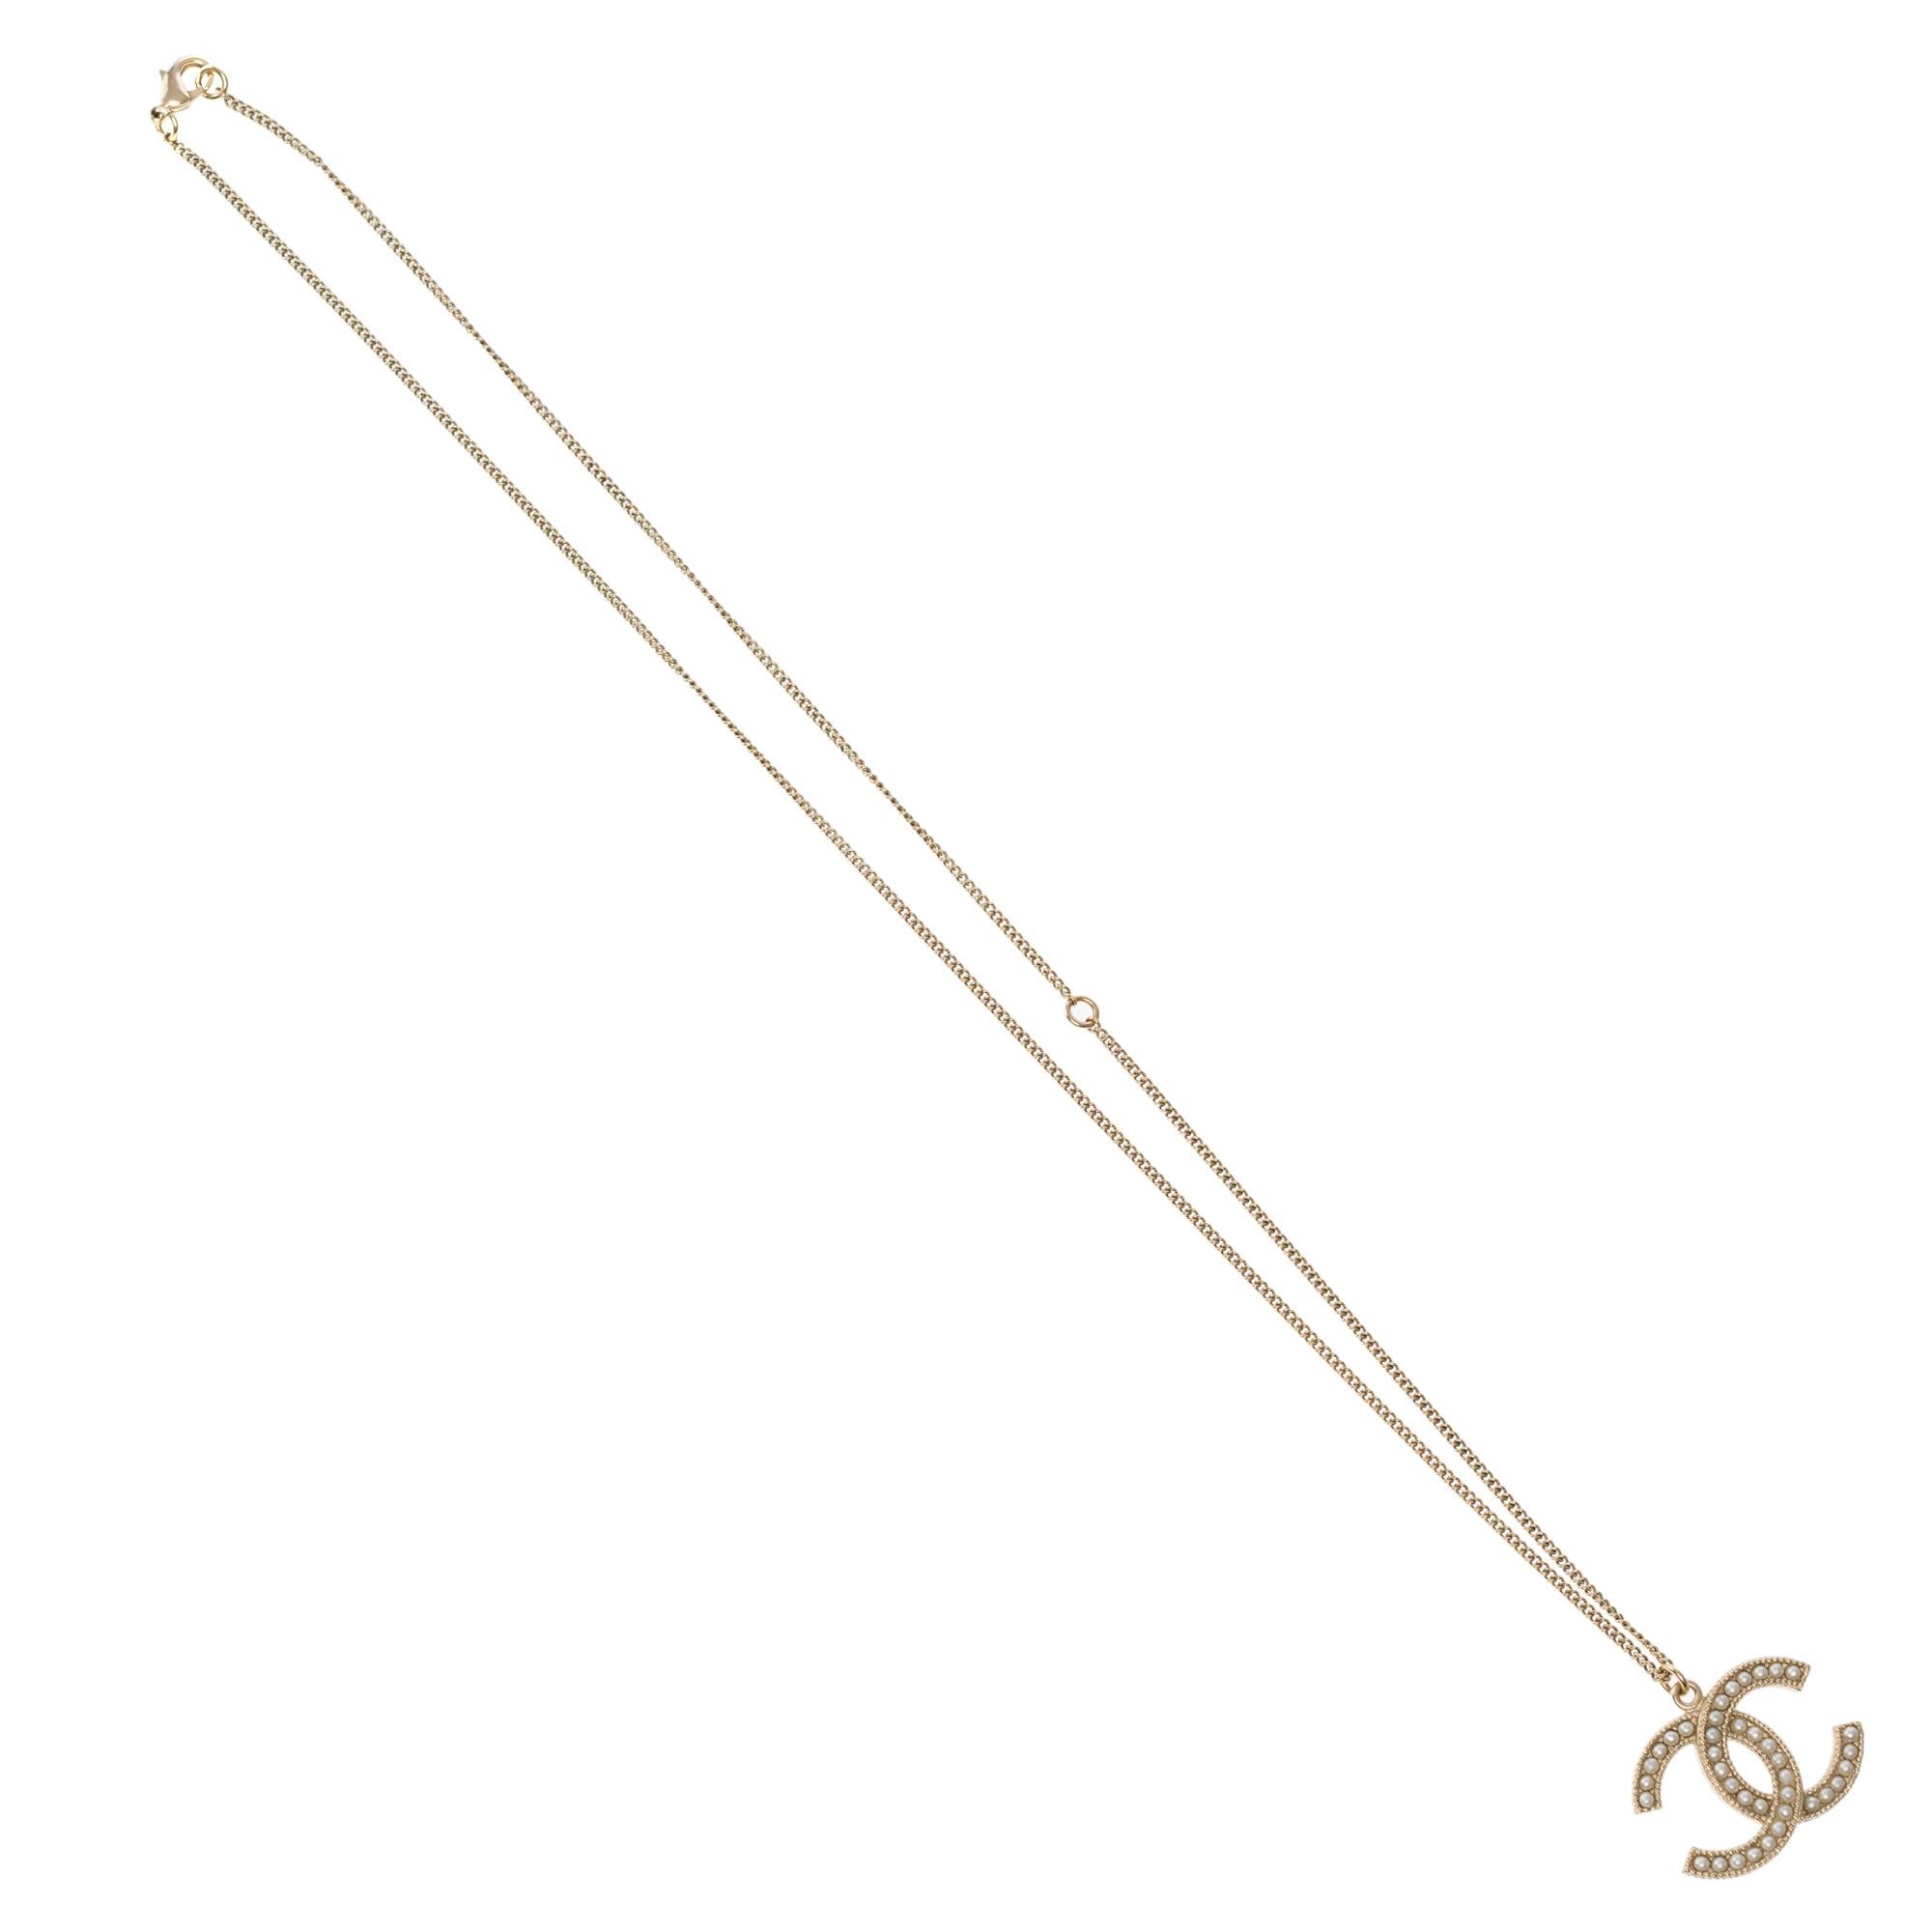 Necklace pendant Chanel logo CC in gold color metal and faux pearls 
Length: 33 cm (13 Inches)
CC logo width: 3 cm (1.2 Inches)
Possible to wear short or long

Reference: 101541

General condition: 7/10
Sold without box